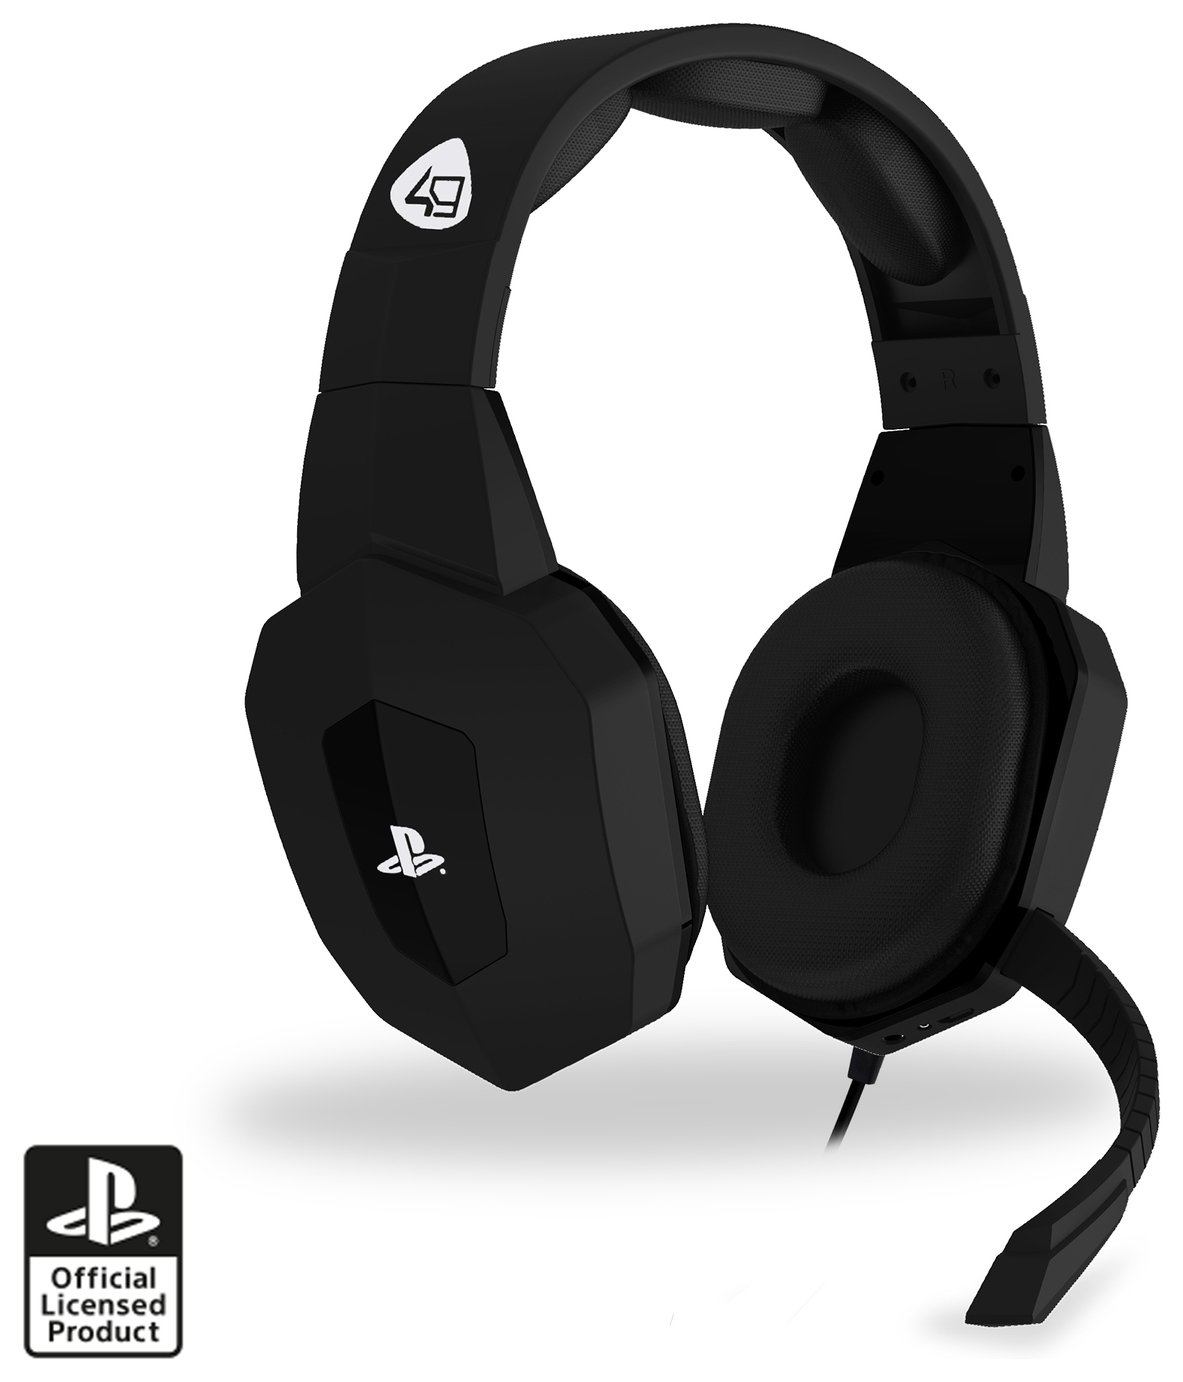 headset for ps4 argos